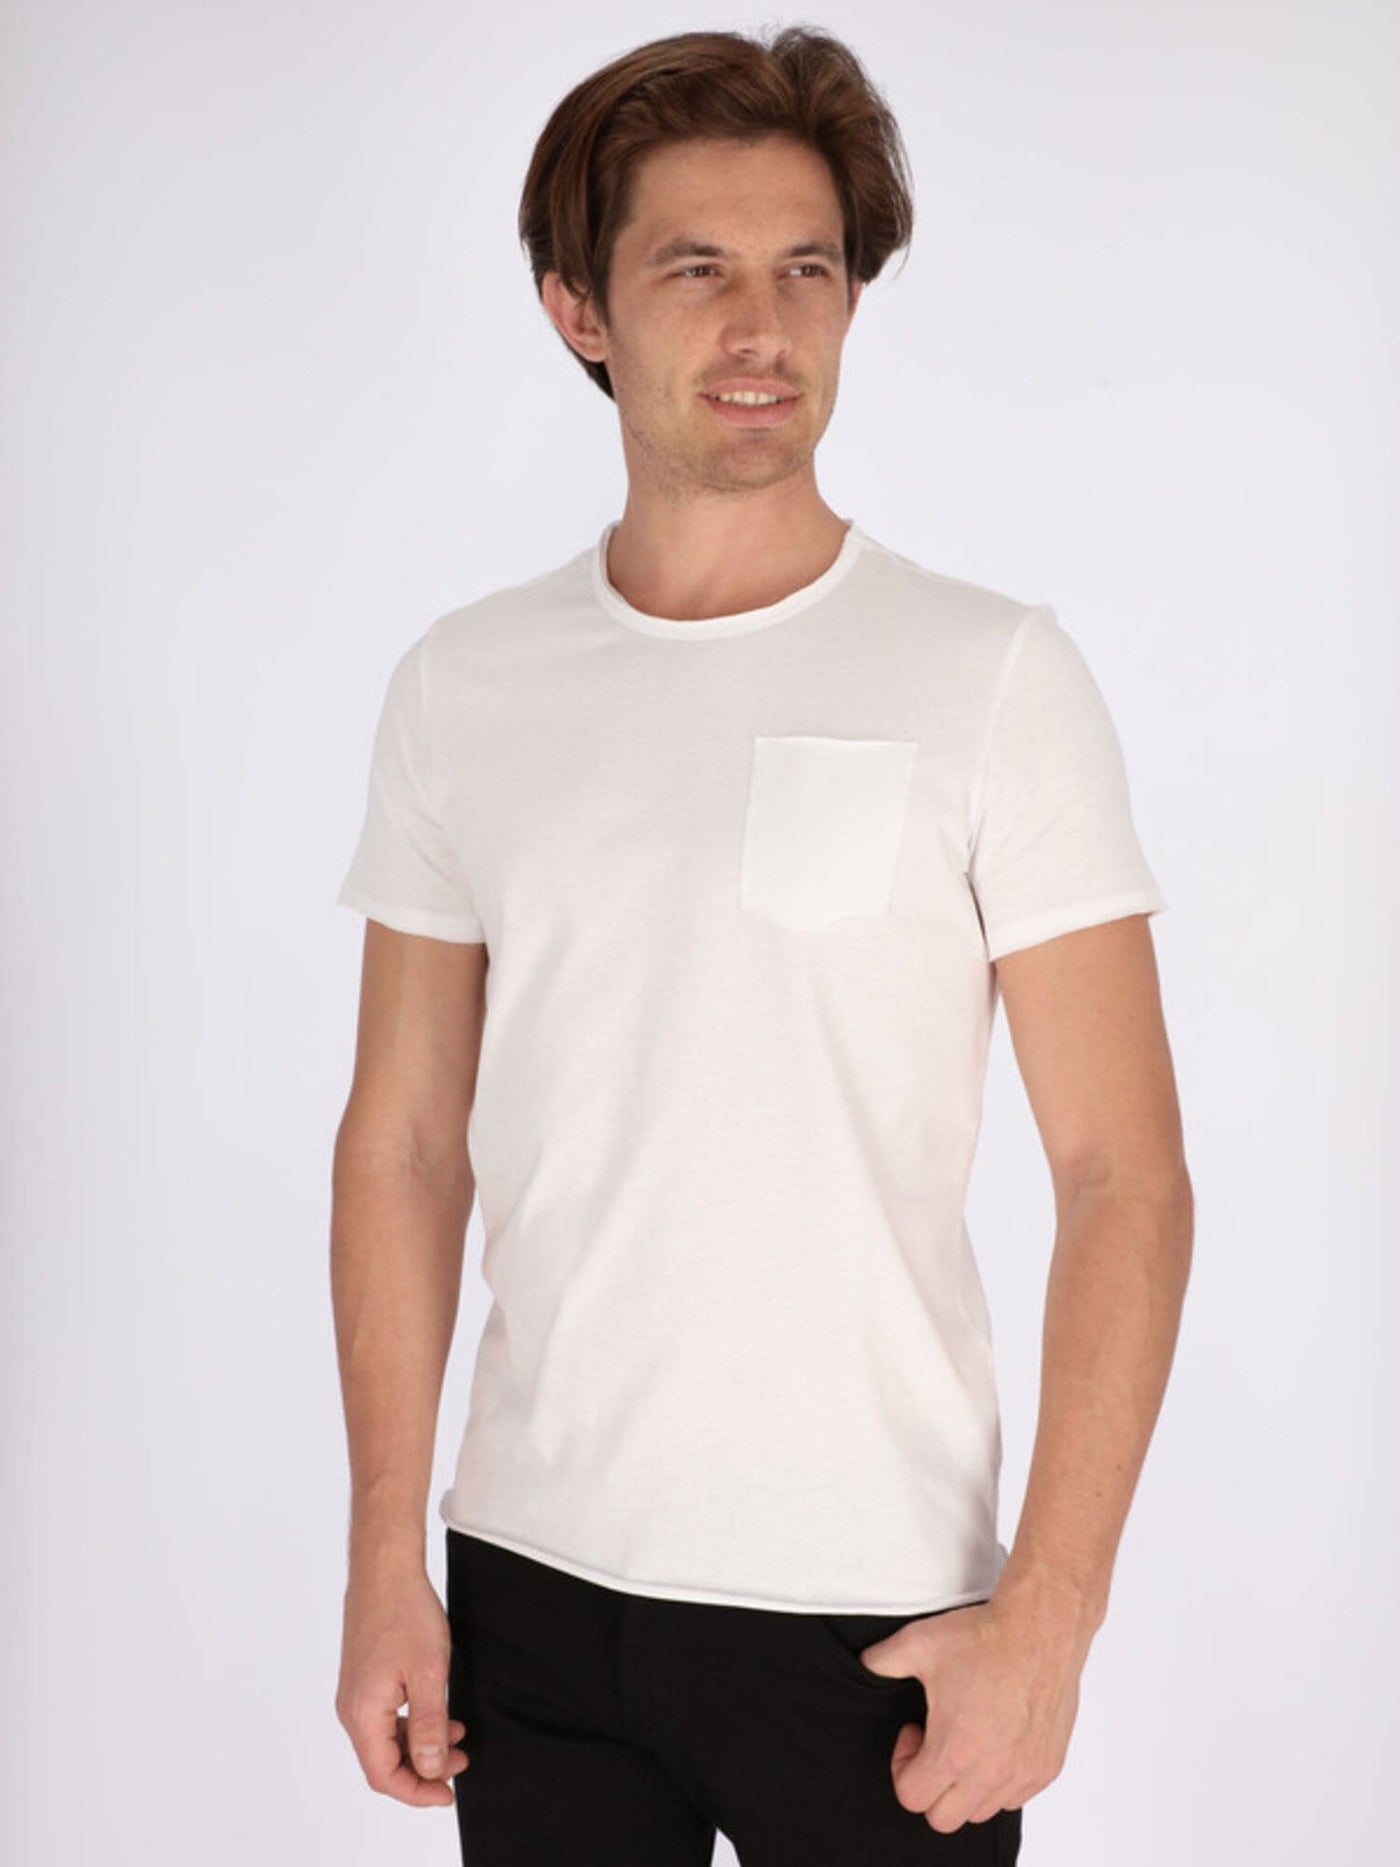 OR T-Shirts Round Neck Chest Pocket T-Shirt